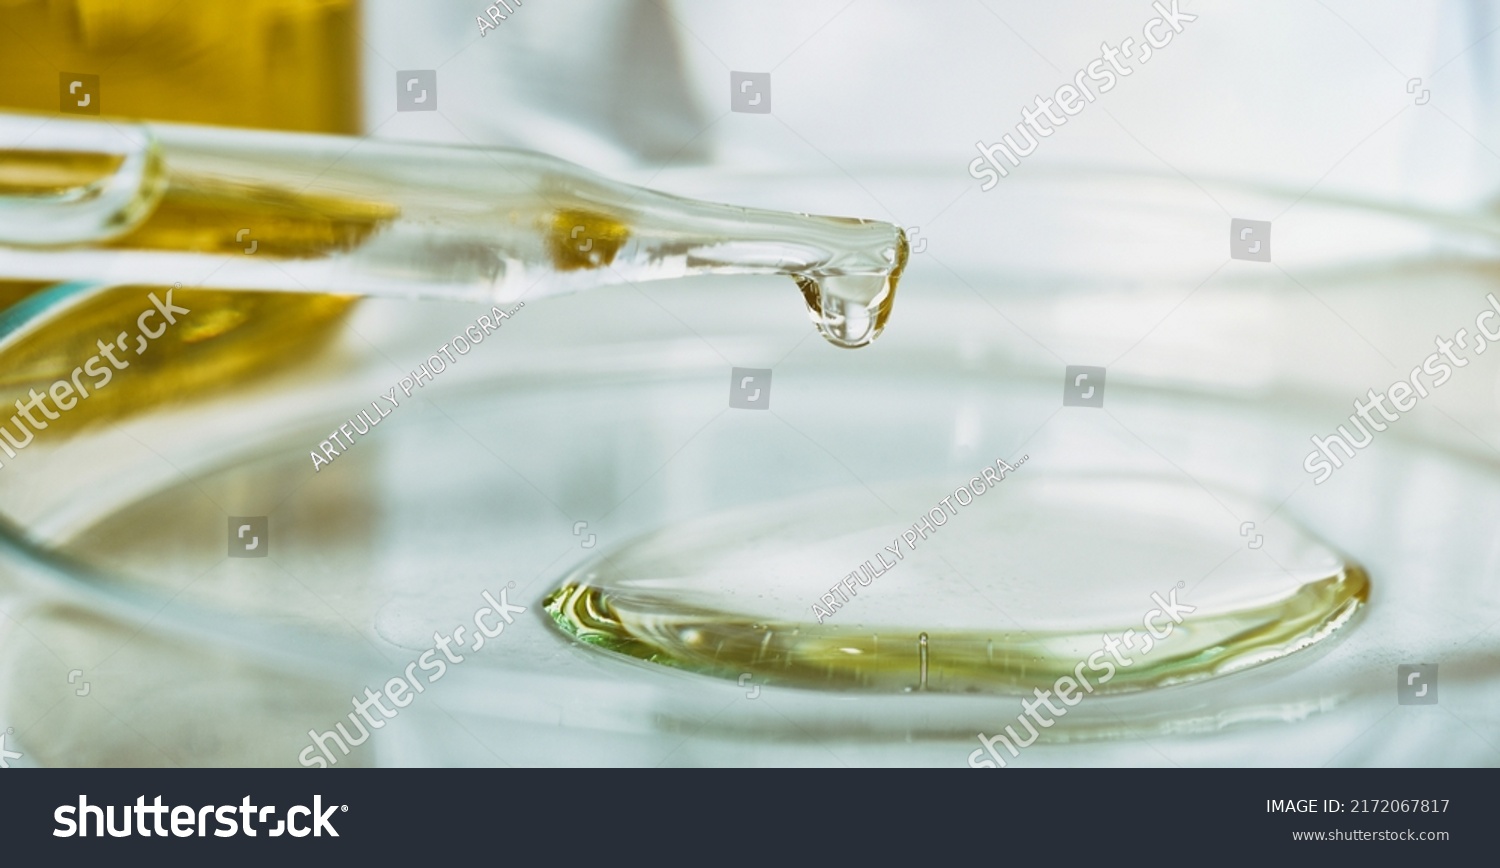 Oil dropping, Laboratory and science experiments, Formulating the chemical for medical research, Quality control test of petroleum industry products concept. #2172067817